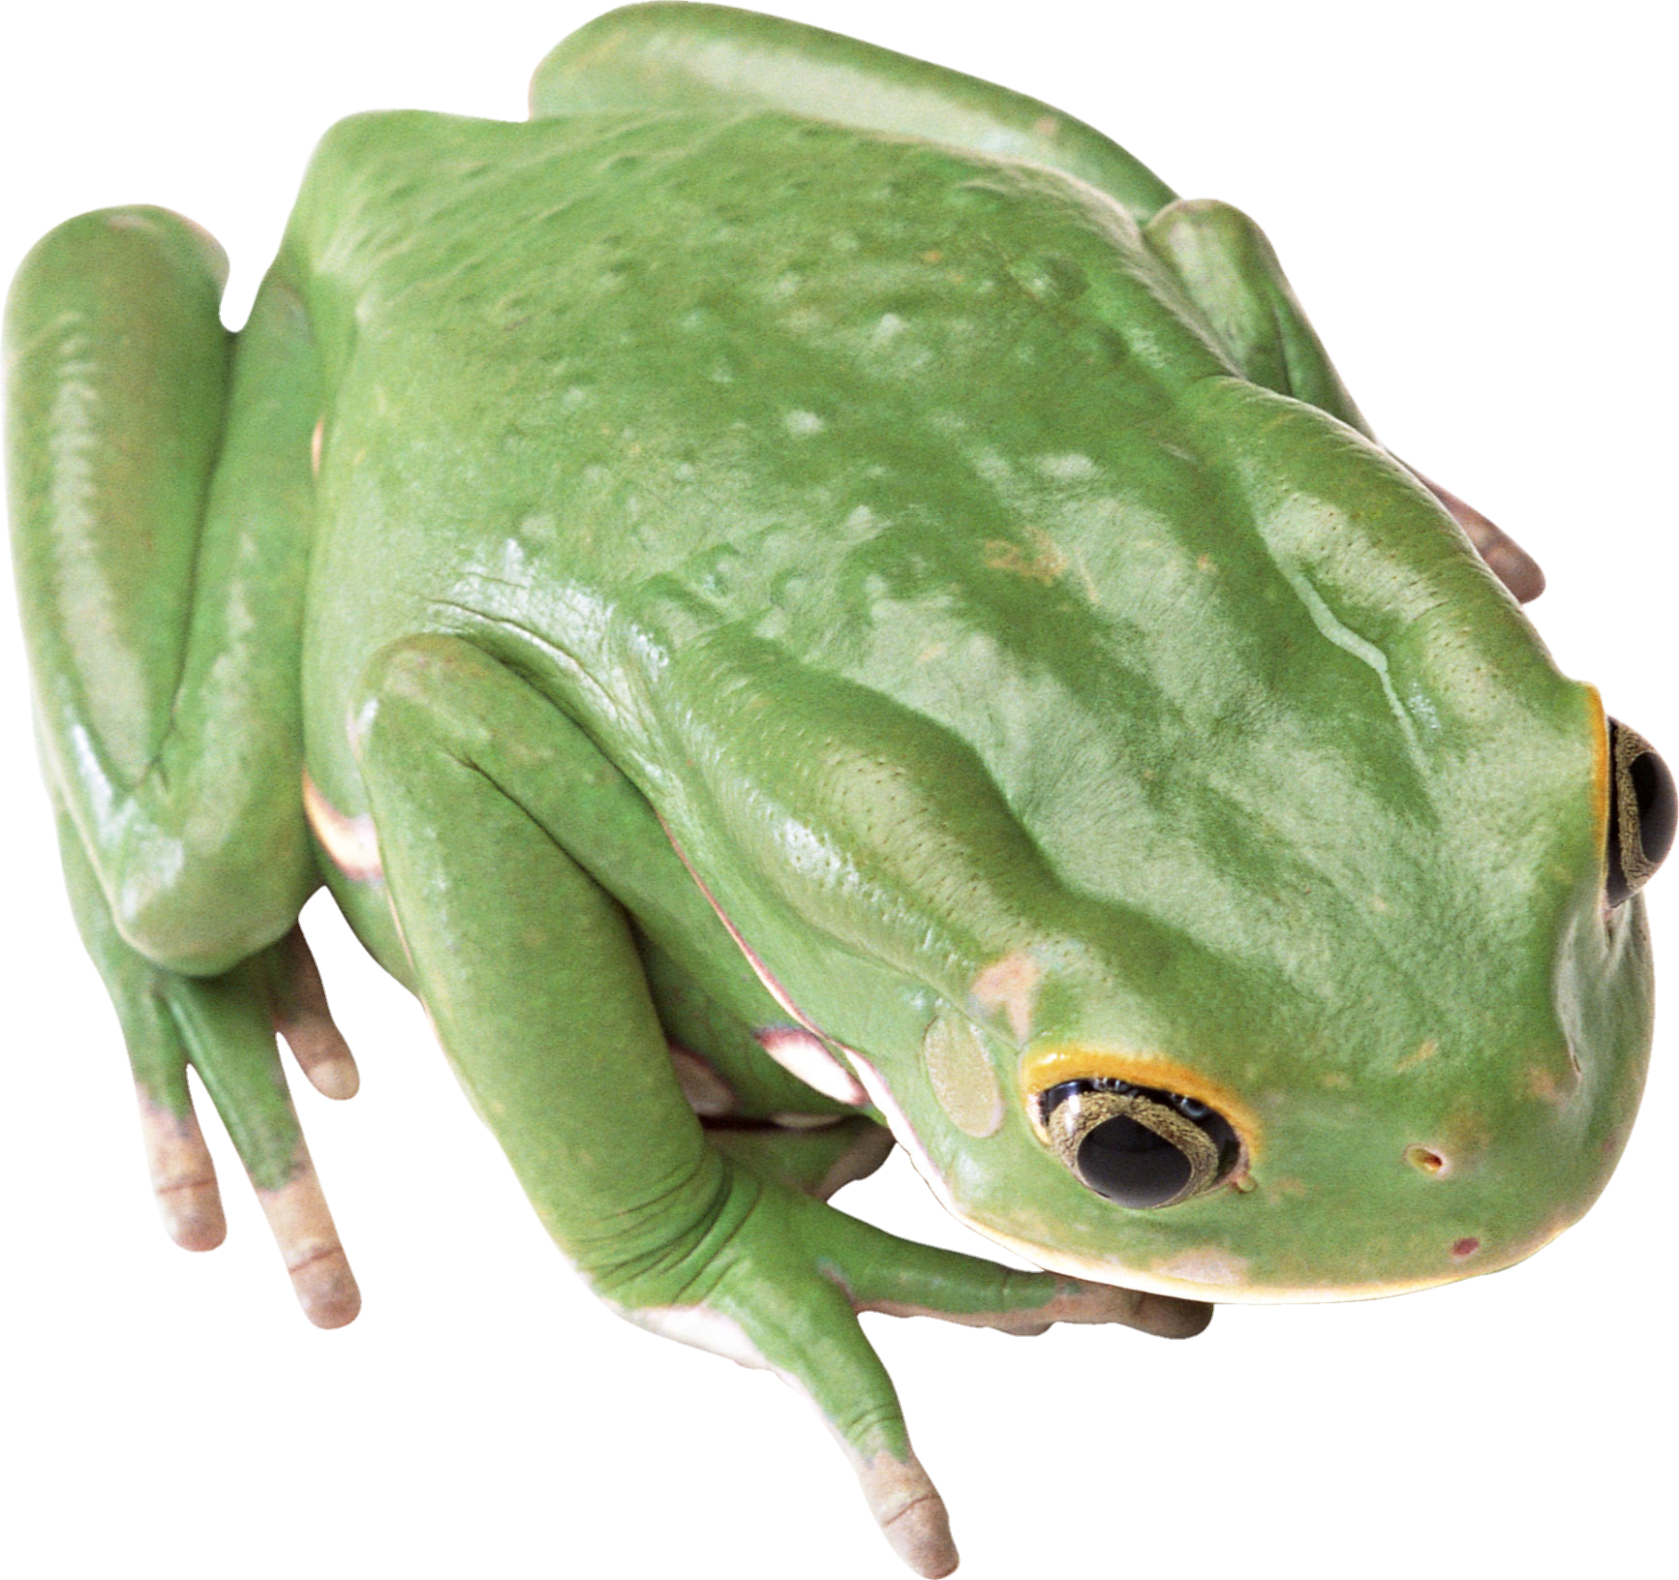 frog-png-image-from-pngfre-8